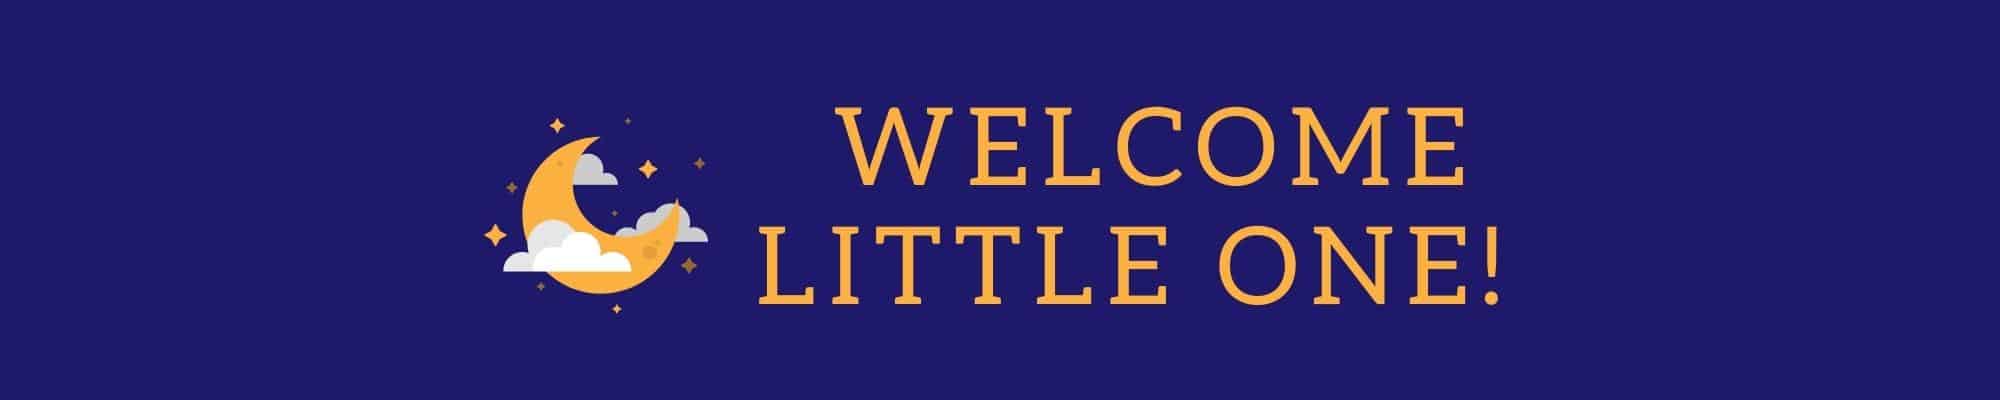 welcome_little_one_header